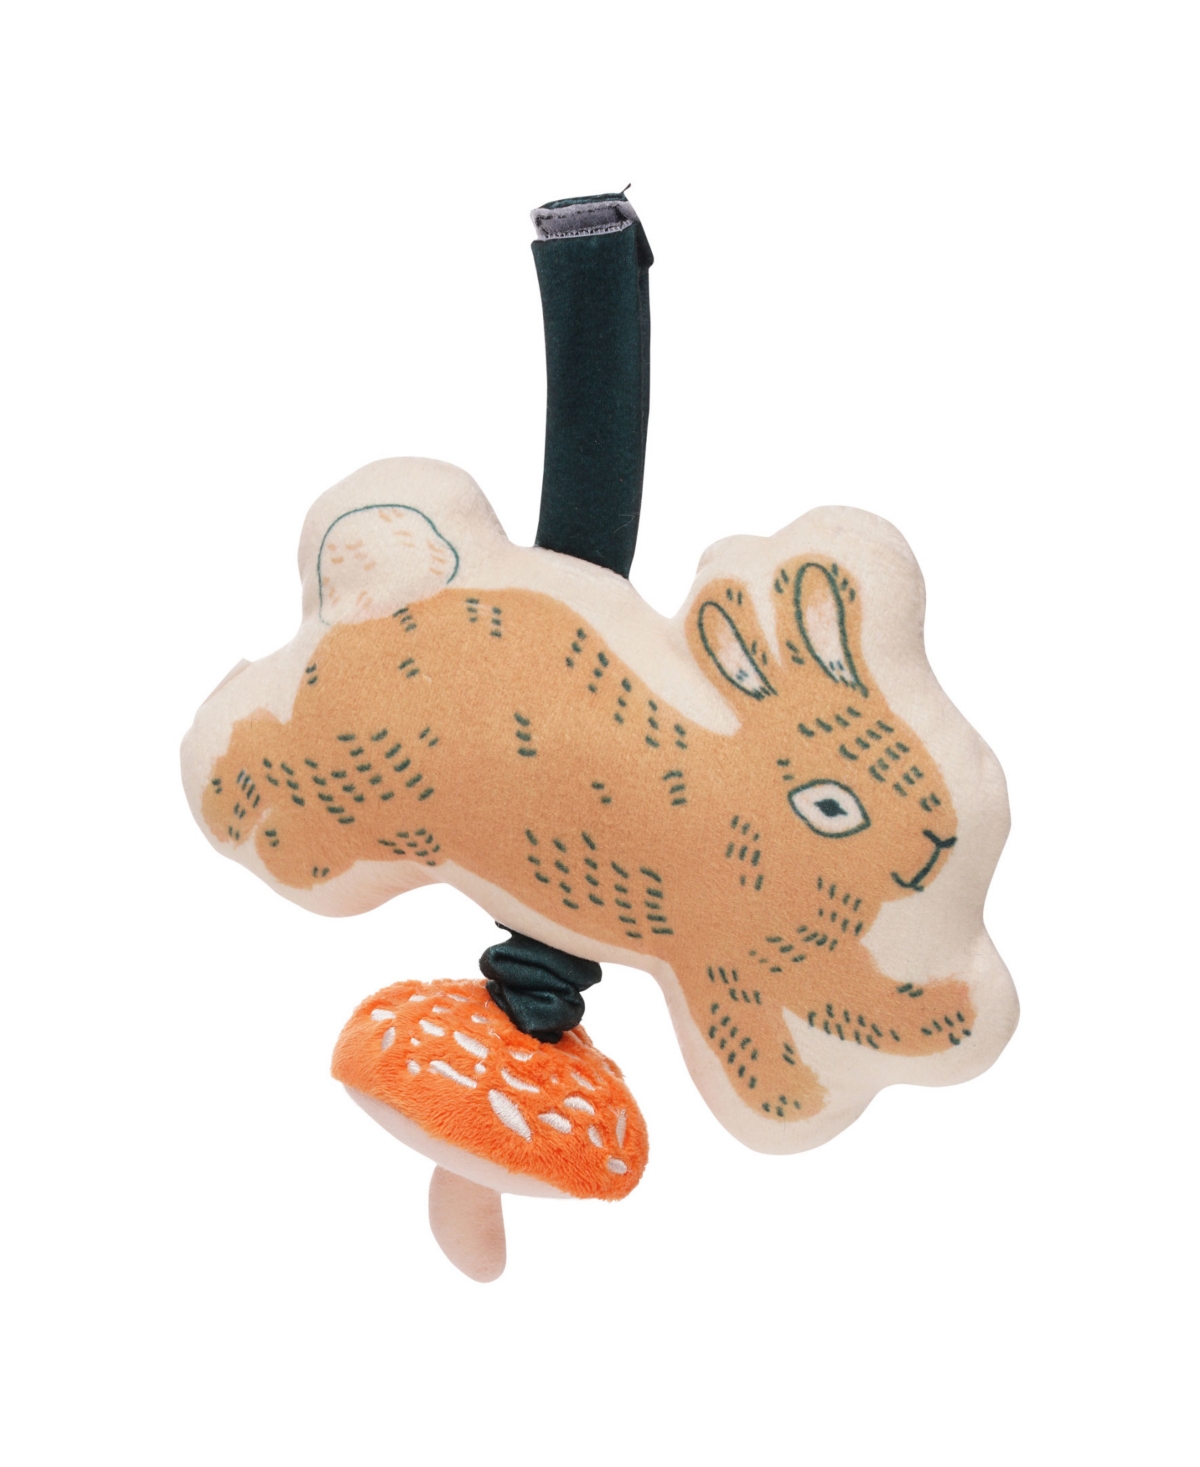 Manhattan Toy Company Kids' Button Bunny Brahms's Lullaby Pull Musical Toy In Multicolor